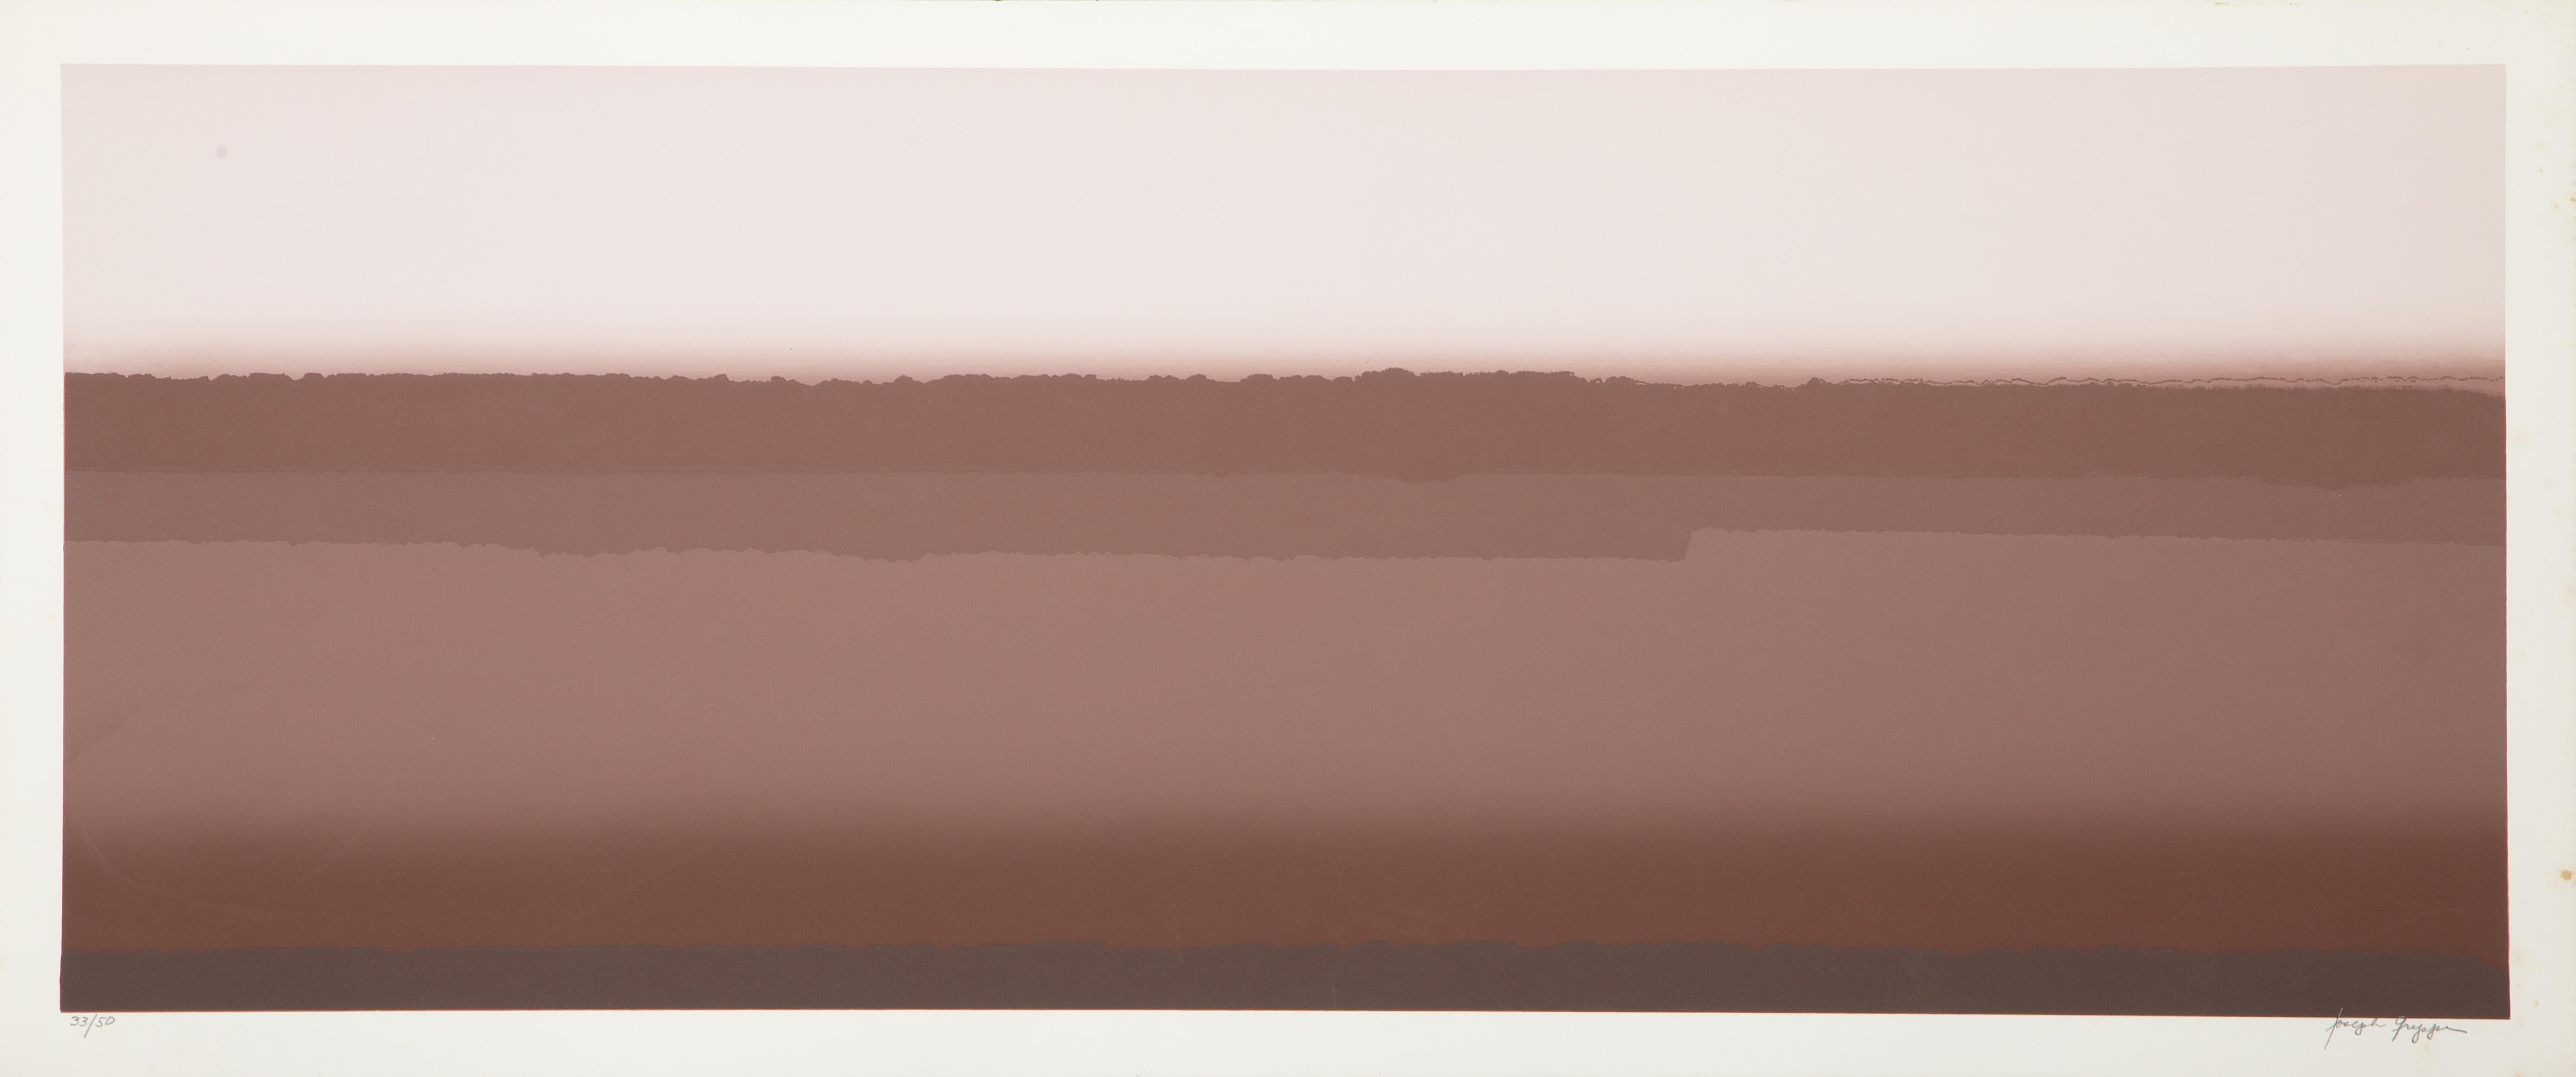 Desert II Variation
Joseph Grippi, American (1924–2001)
Screenprint, signed and numbered in pencil
Edition of 33/50
Image Size: 14 x 36.25 inches
Size: 16 x 38.25 in. (40.64 x 97.16 cm)